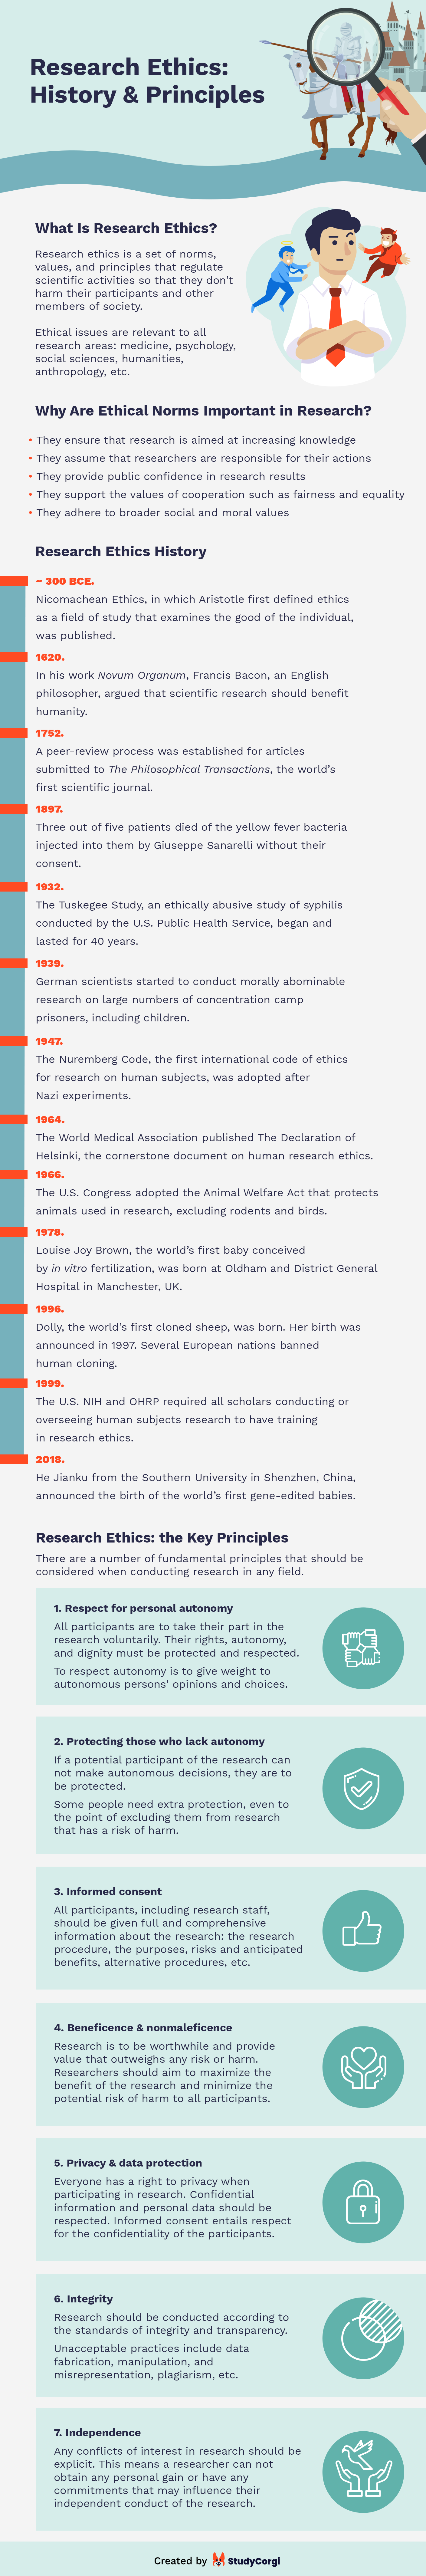 The infographic highlights the key principles of research ethics and the milestones in its development.